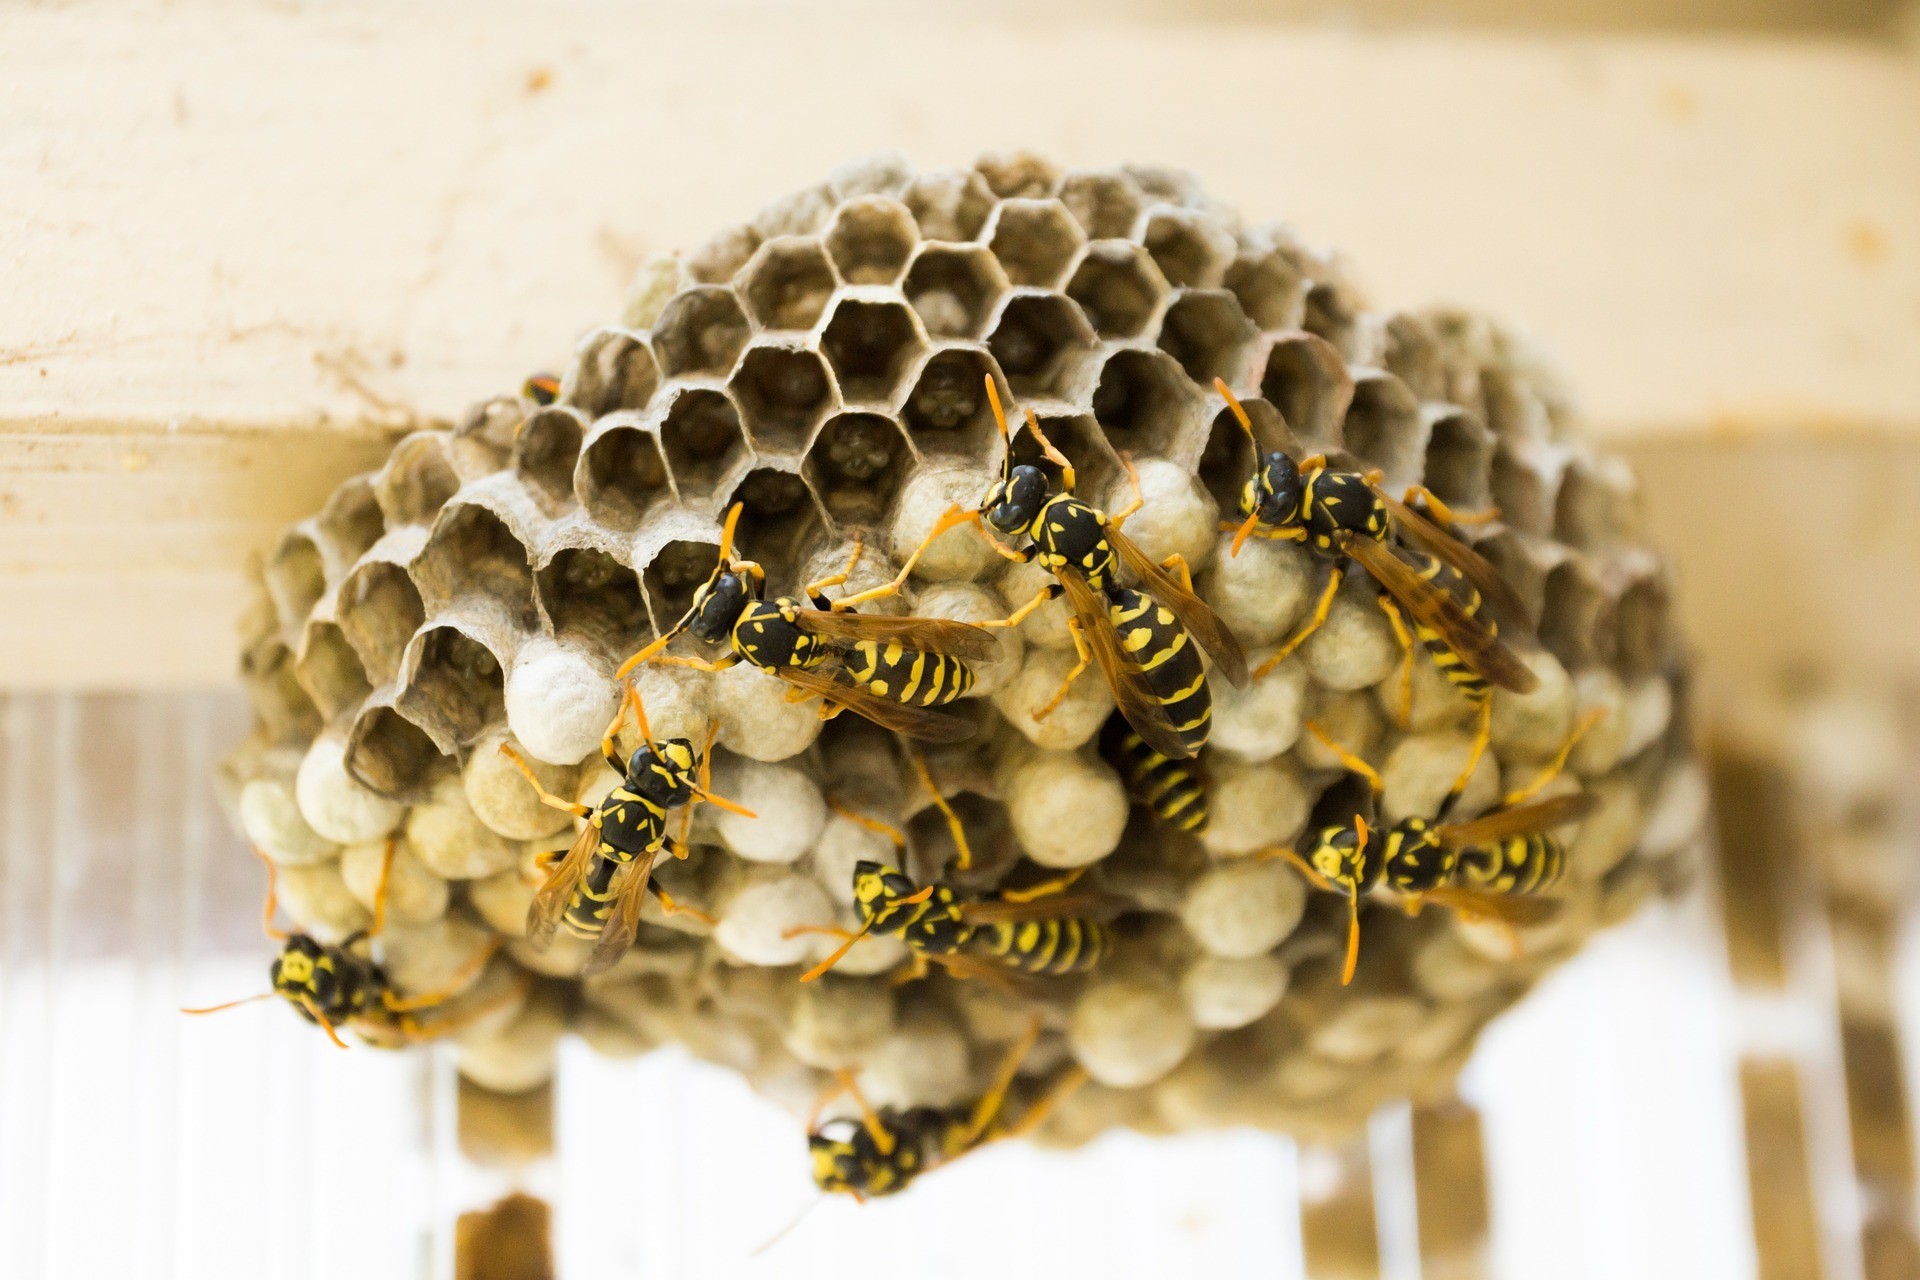 Wasp Control Adelaide